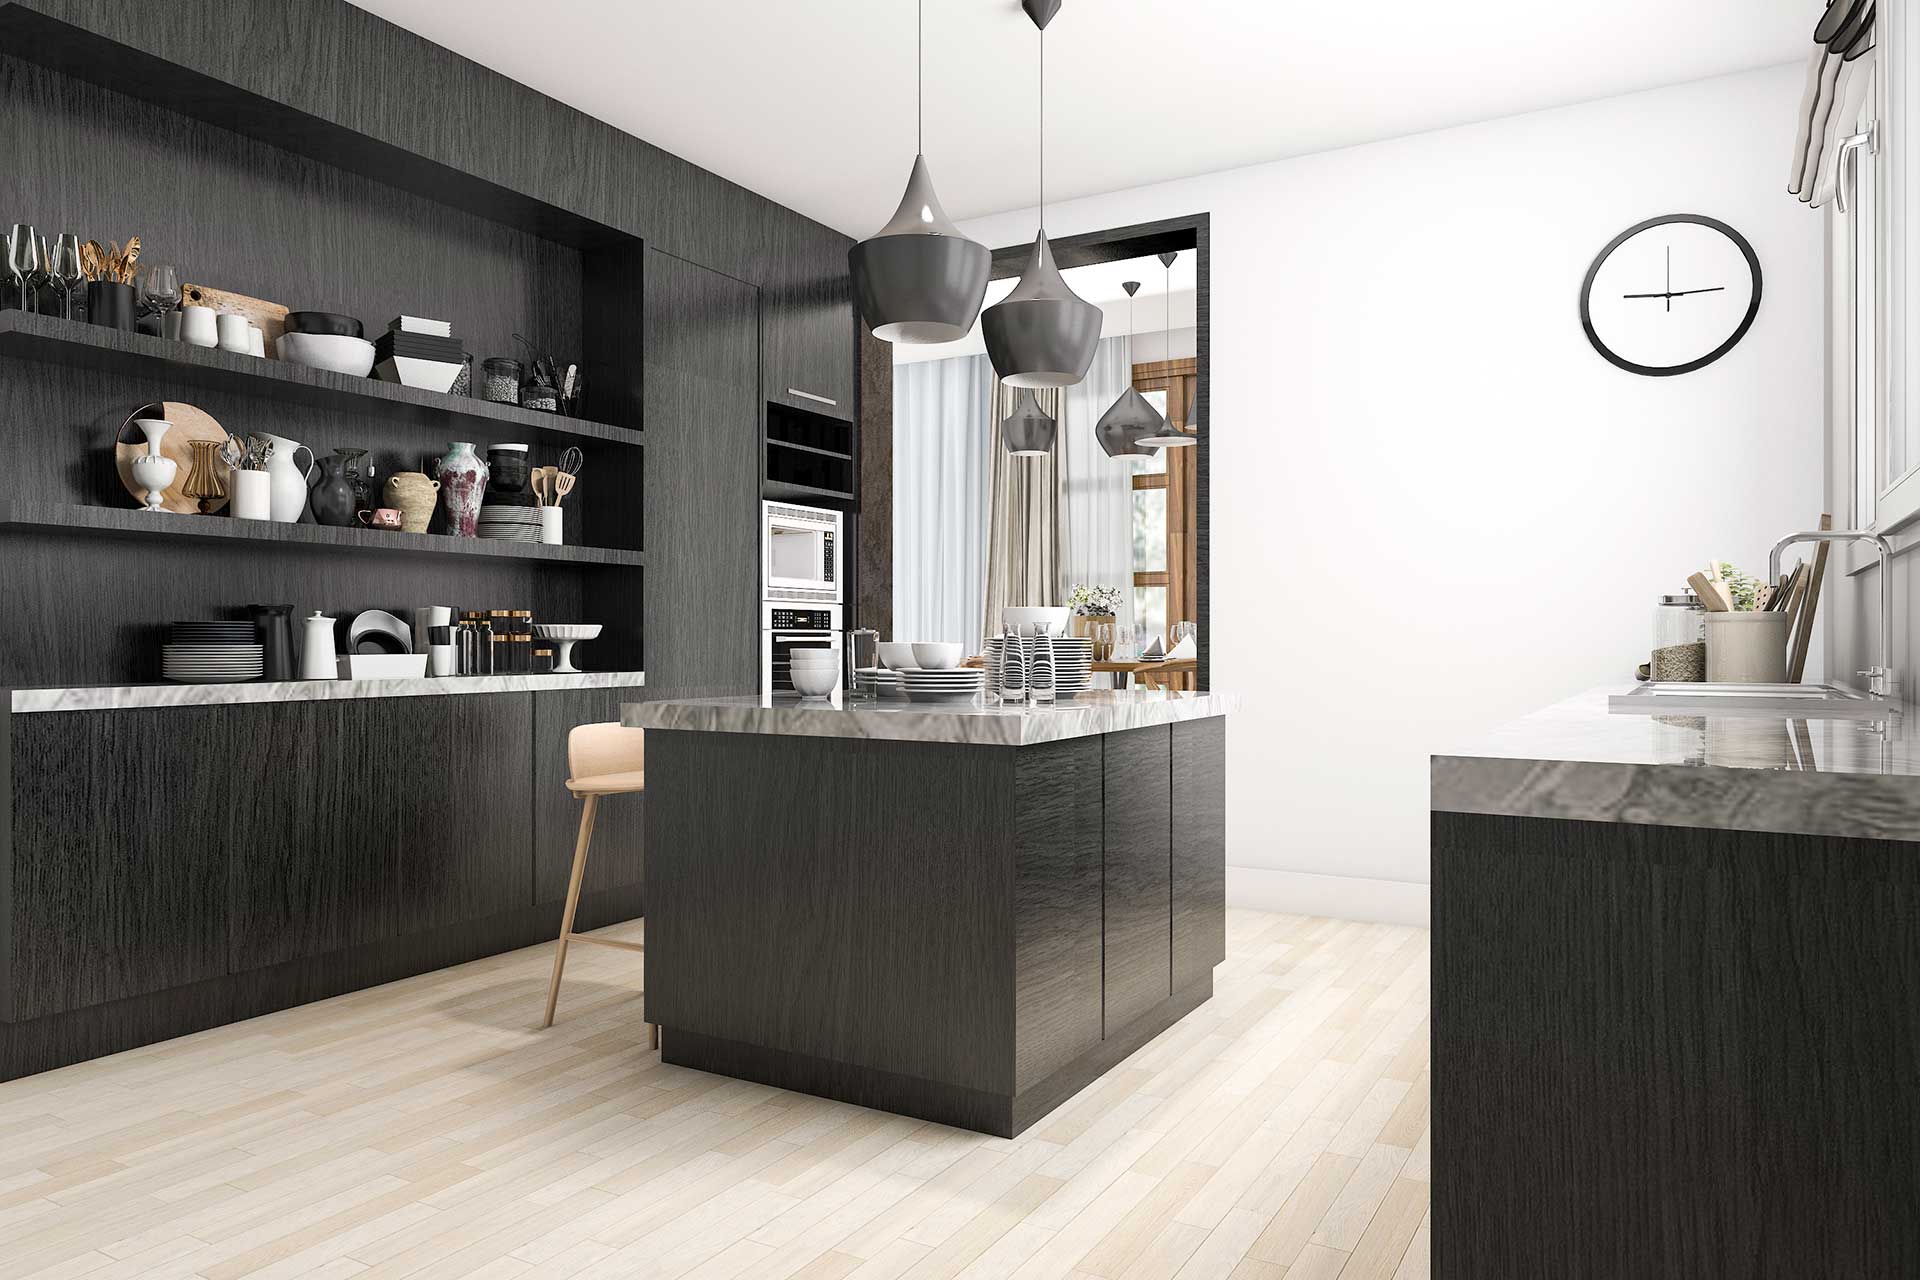 Modern looking kitchen with wood-like black cabinets and grey marble counters and an island with high chairs